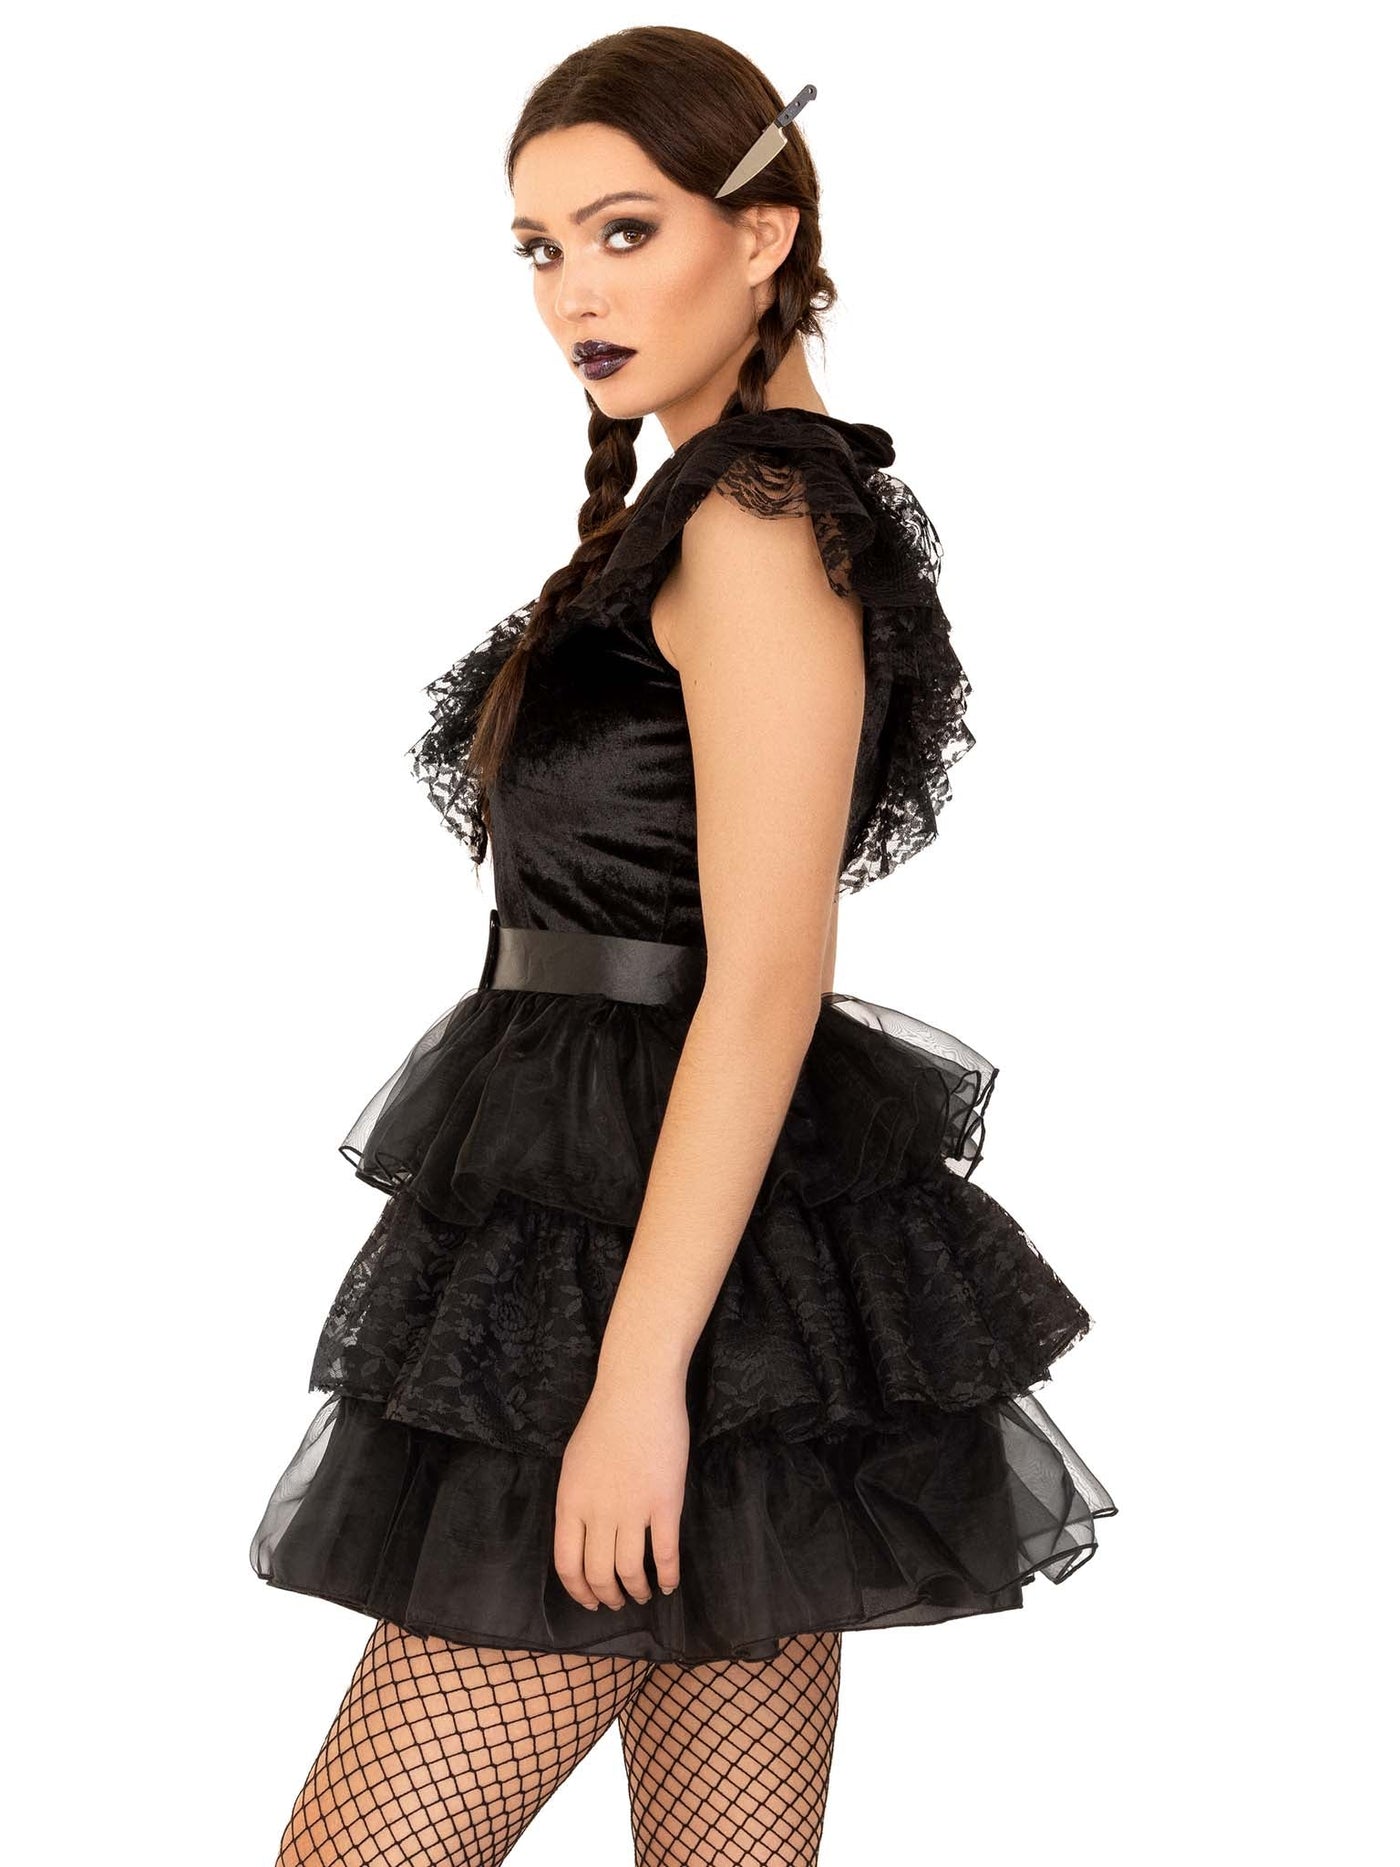 Raving Rebel Gothic Costume - JJ's Party House